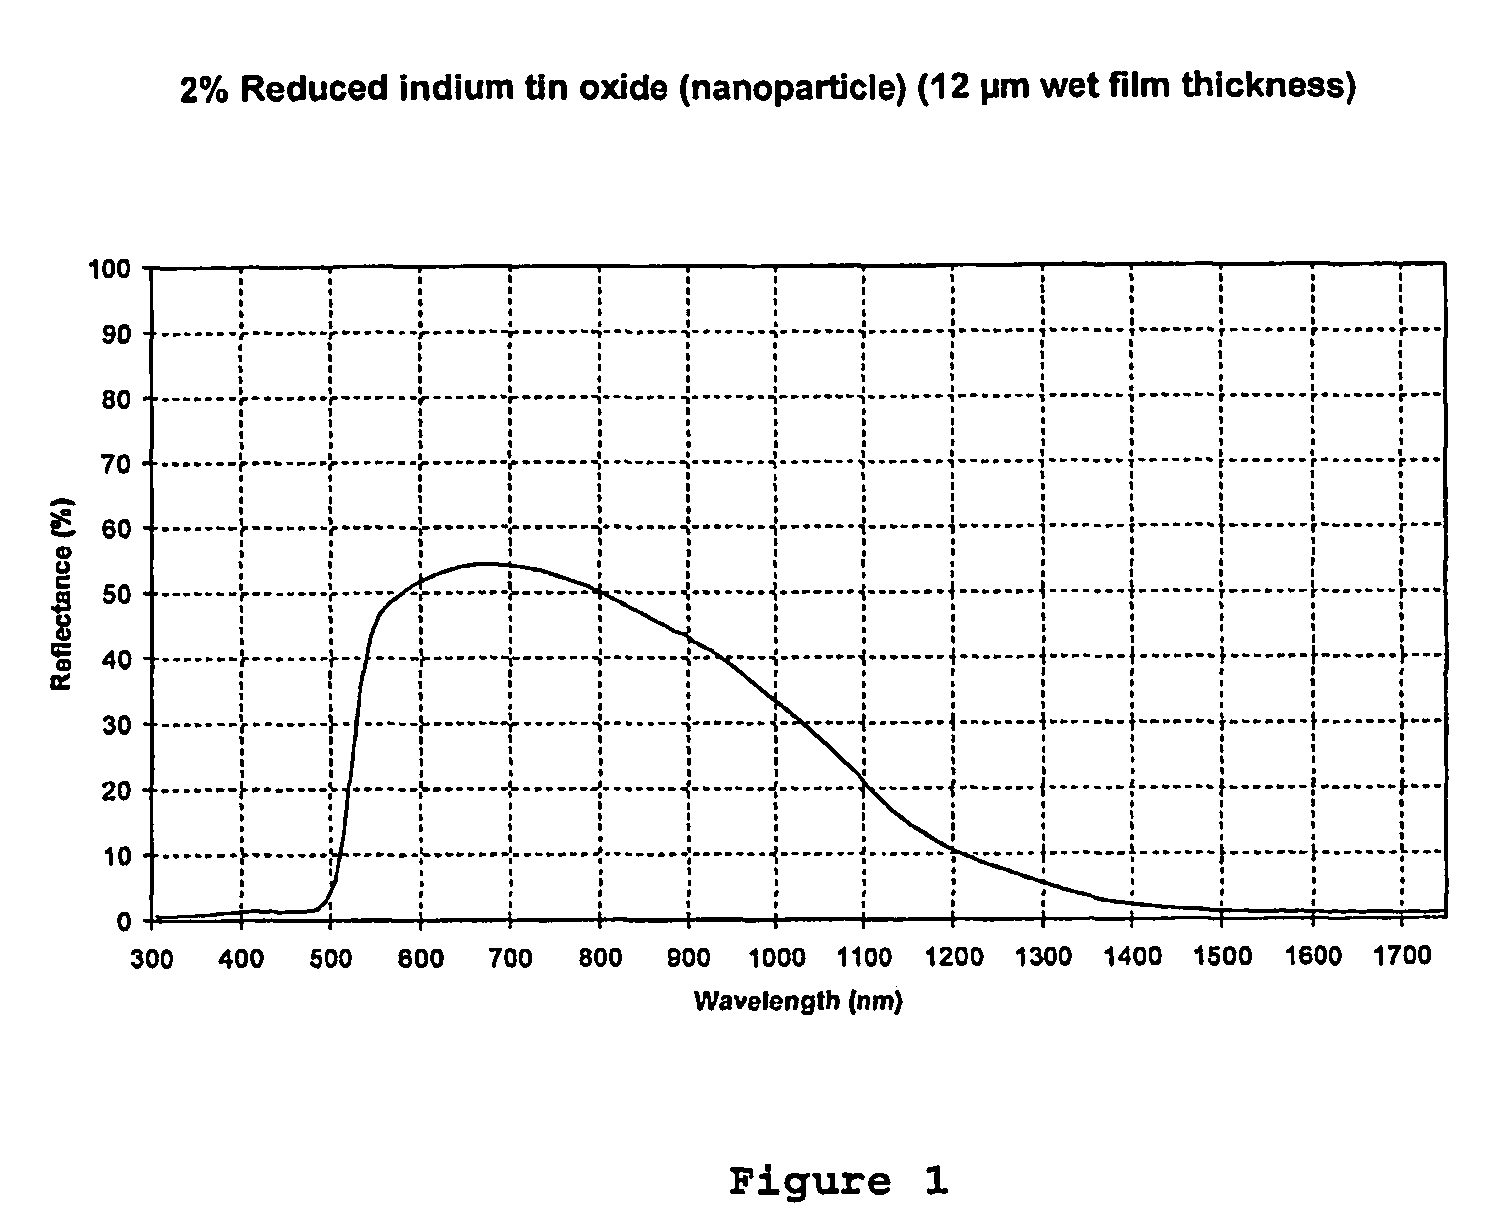 Security inks containing infrared absorbing metal compounds